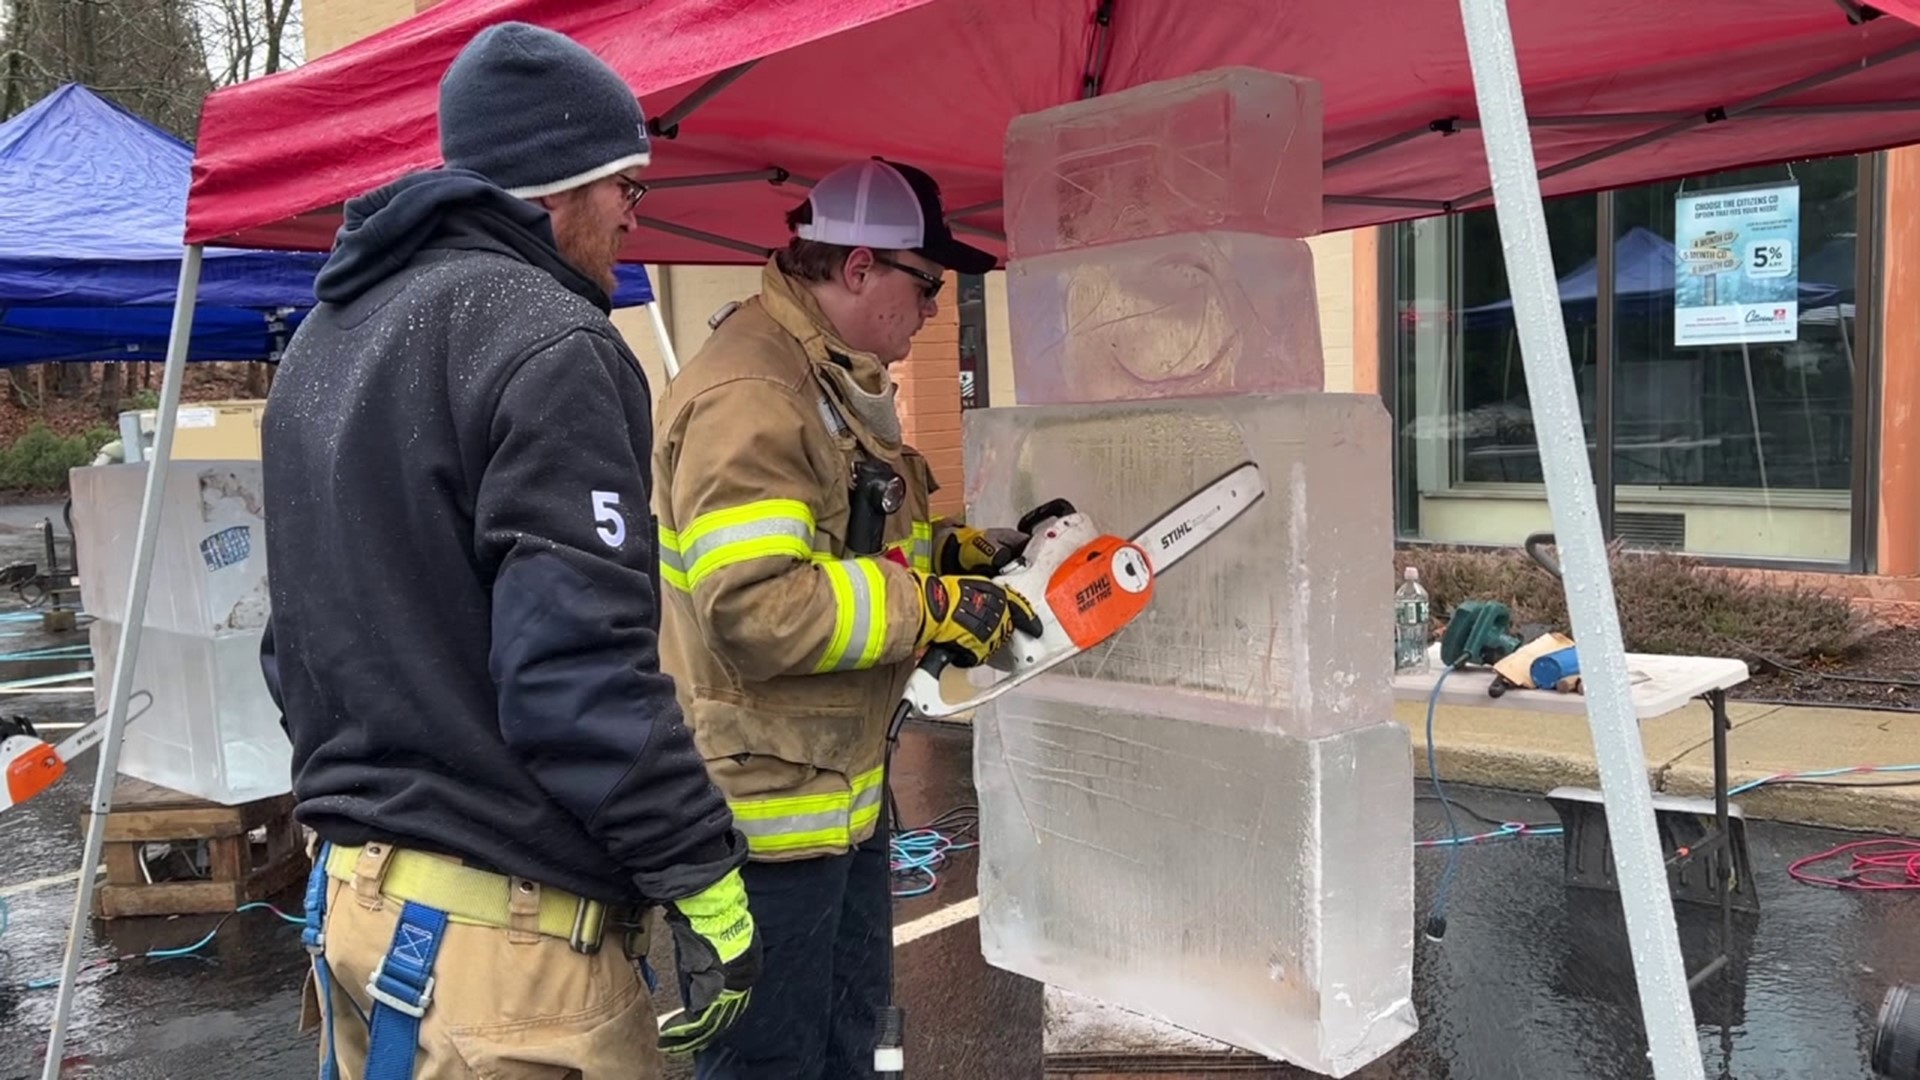 Four fire departments from Lackawanna County participated in a fundraiser as part of the Clarks Summit Festival of Ice.